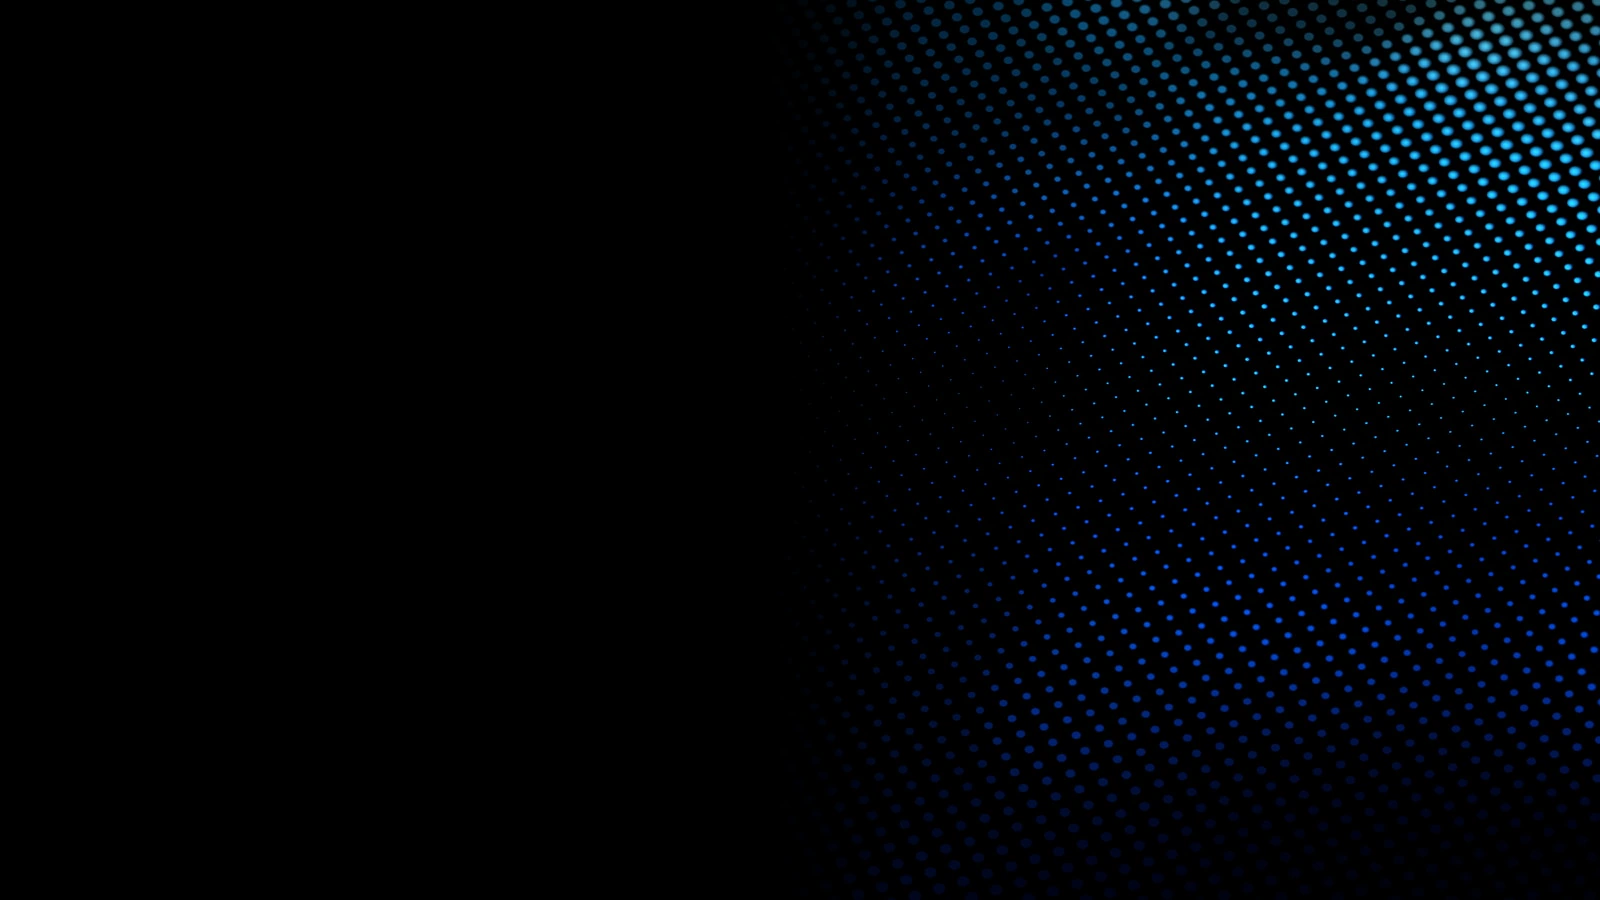 Black background with polkadot texture